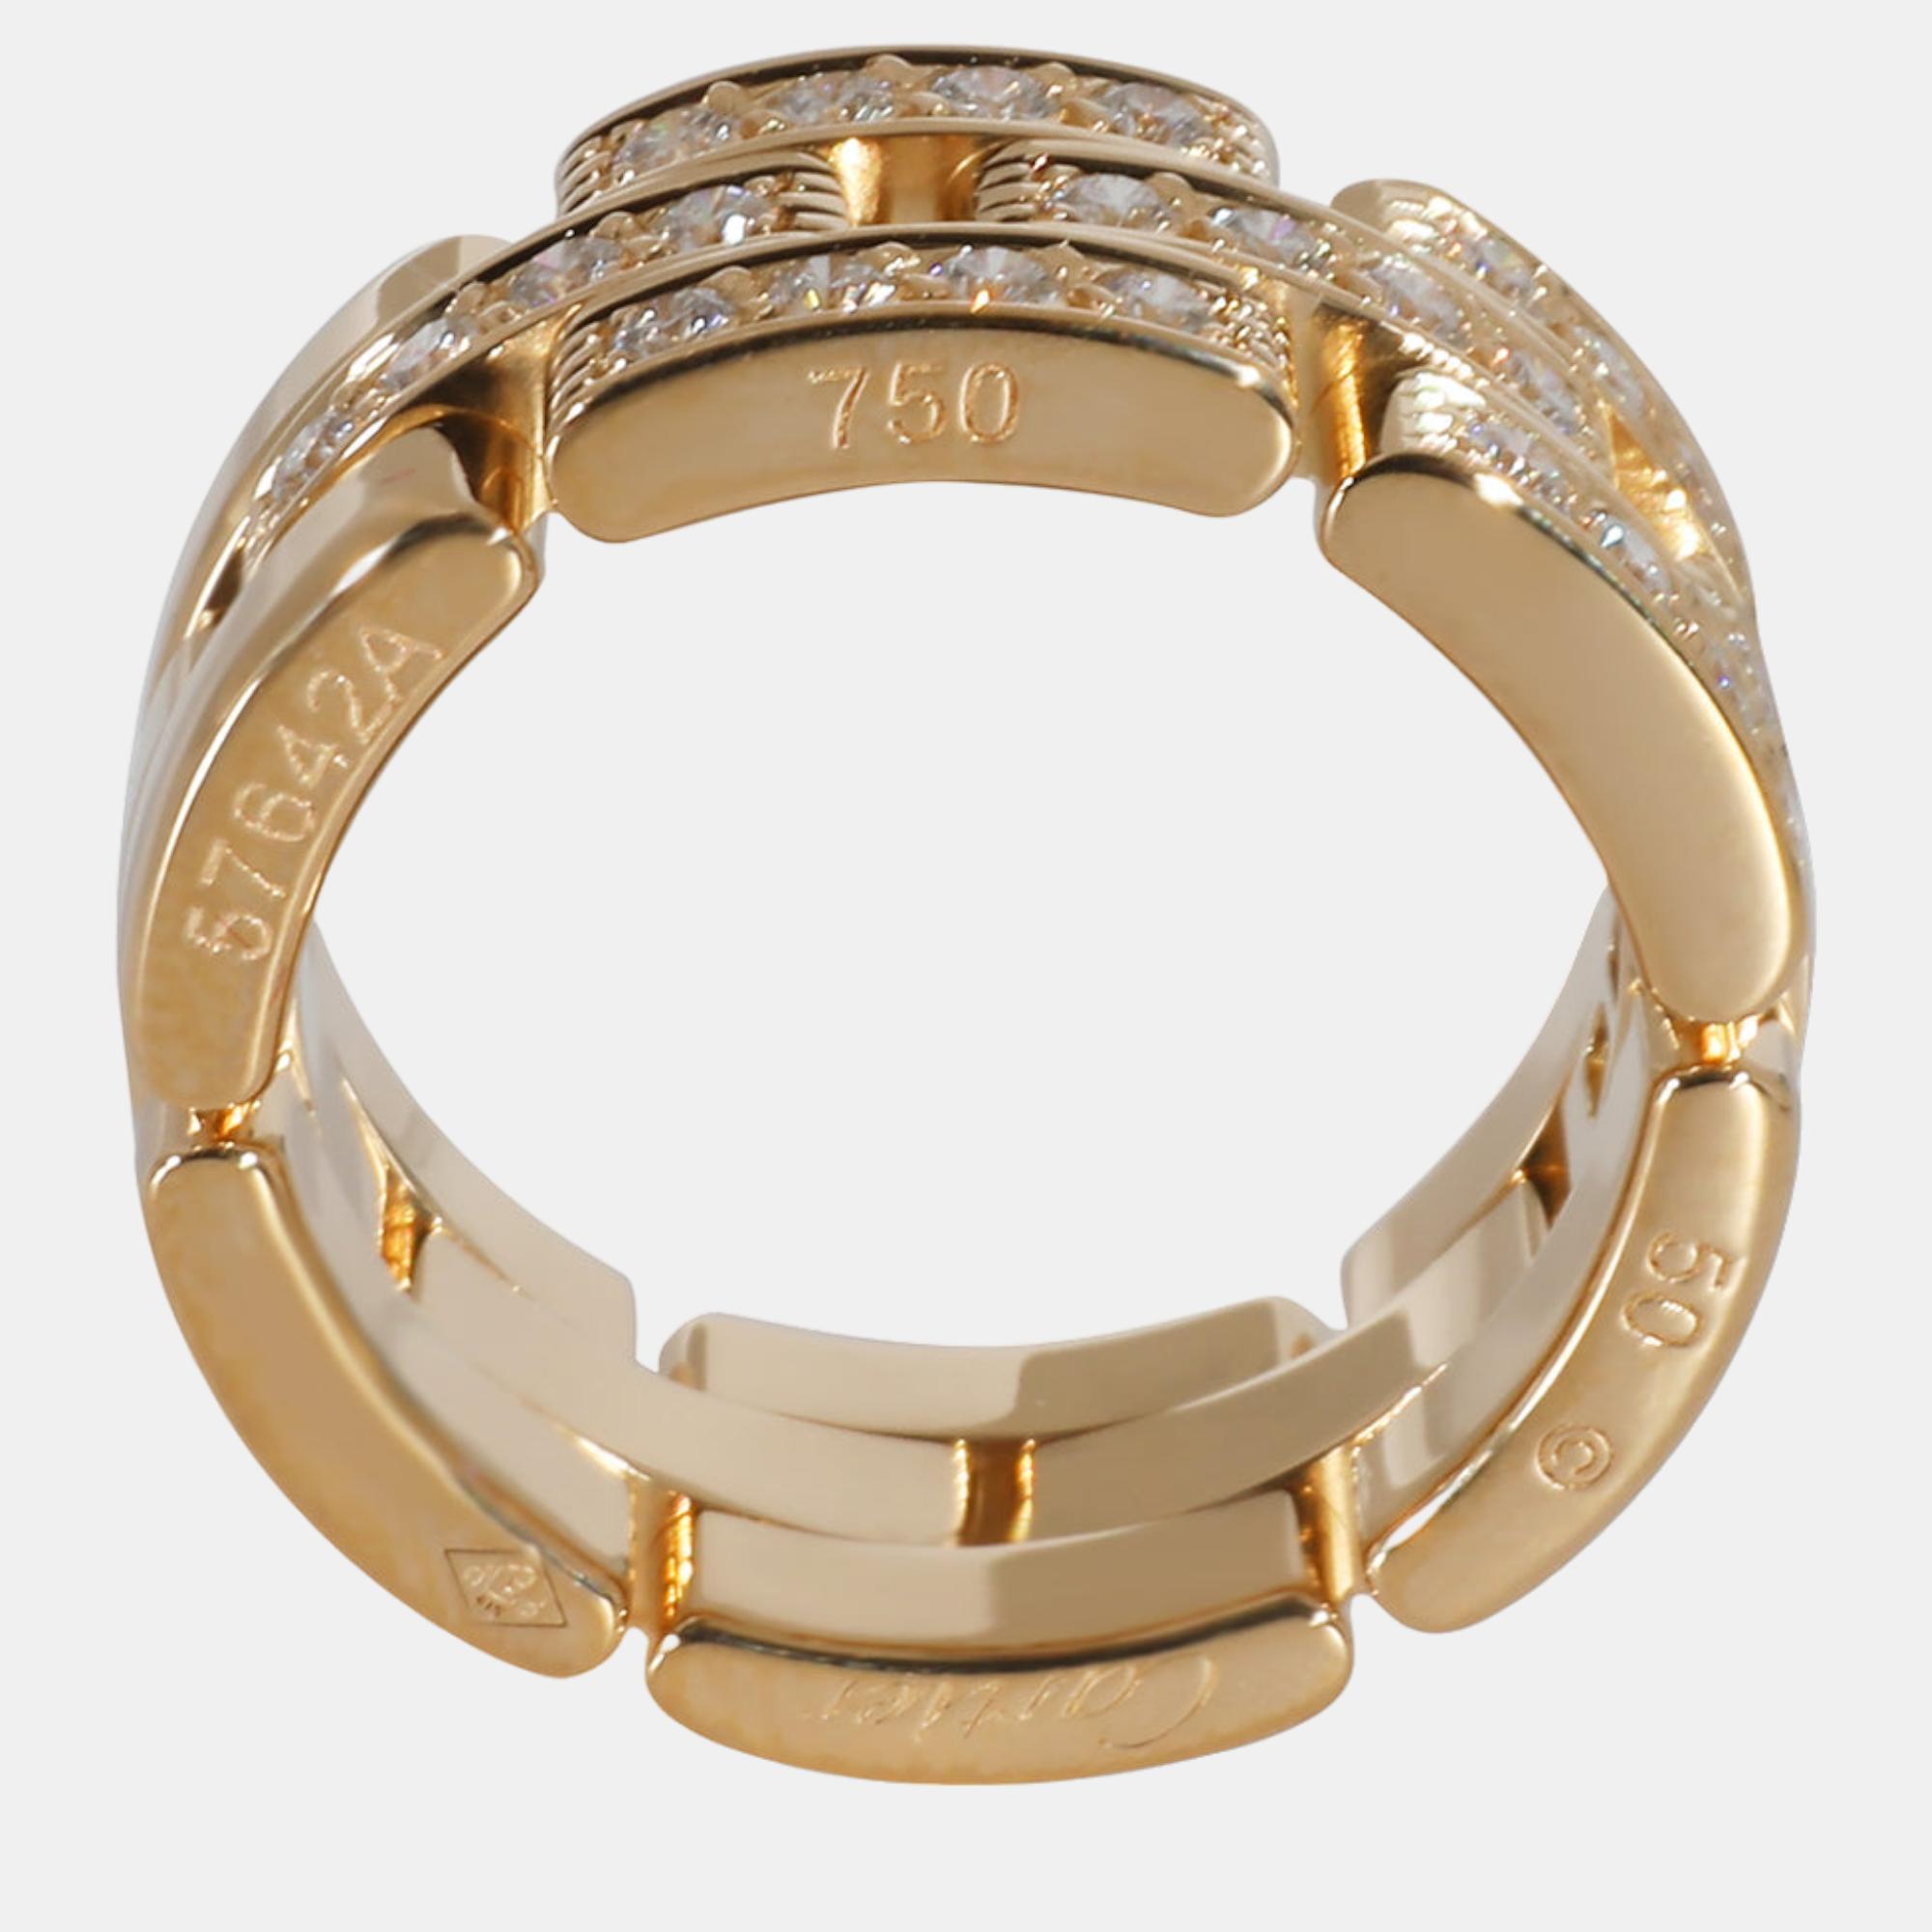 Cartier Maillon Panthere Band In 18k Yellow Gold 0.53 CTW